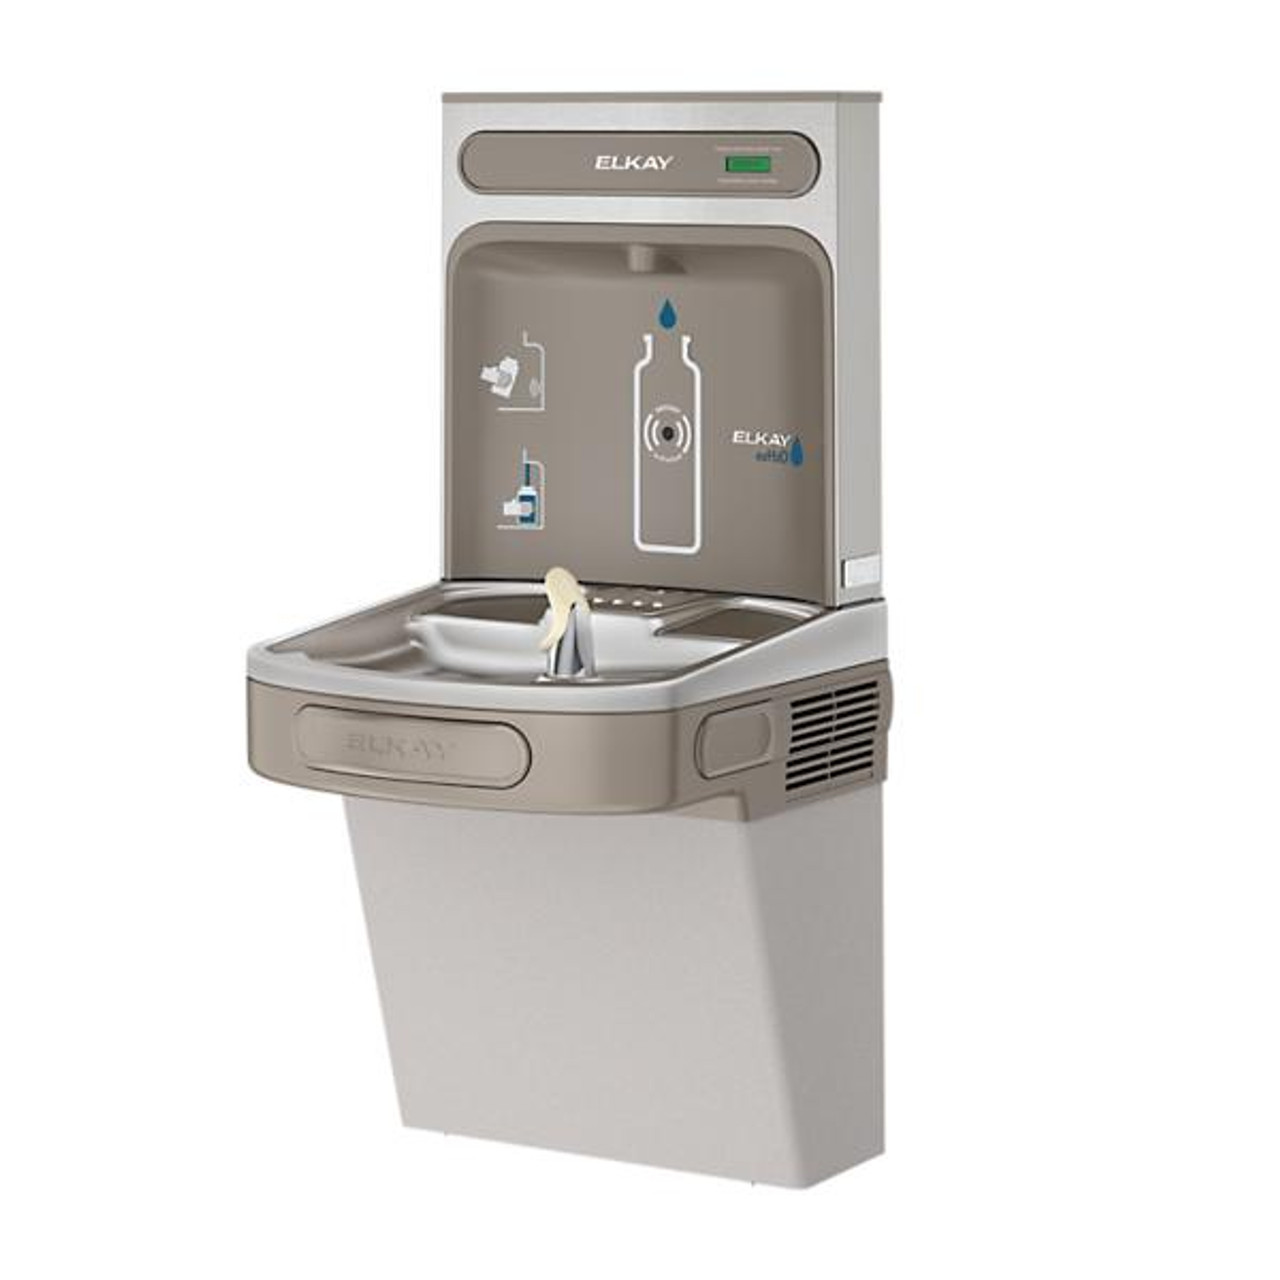 Elkay Wall Mount Drinking Fountain with Bottle Filler - Refrigerated, Light Gray - Chicken Pieces